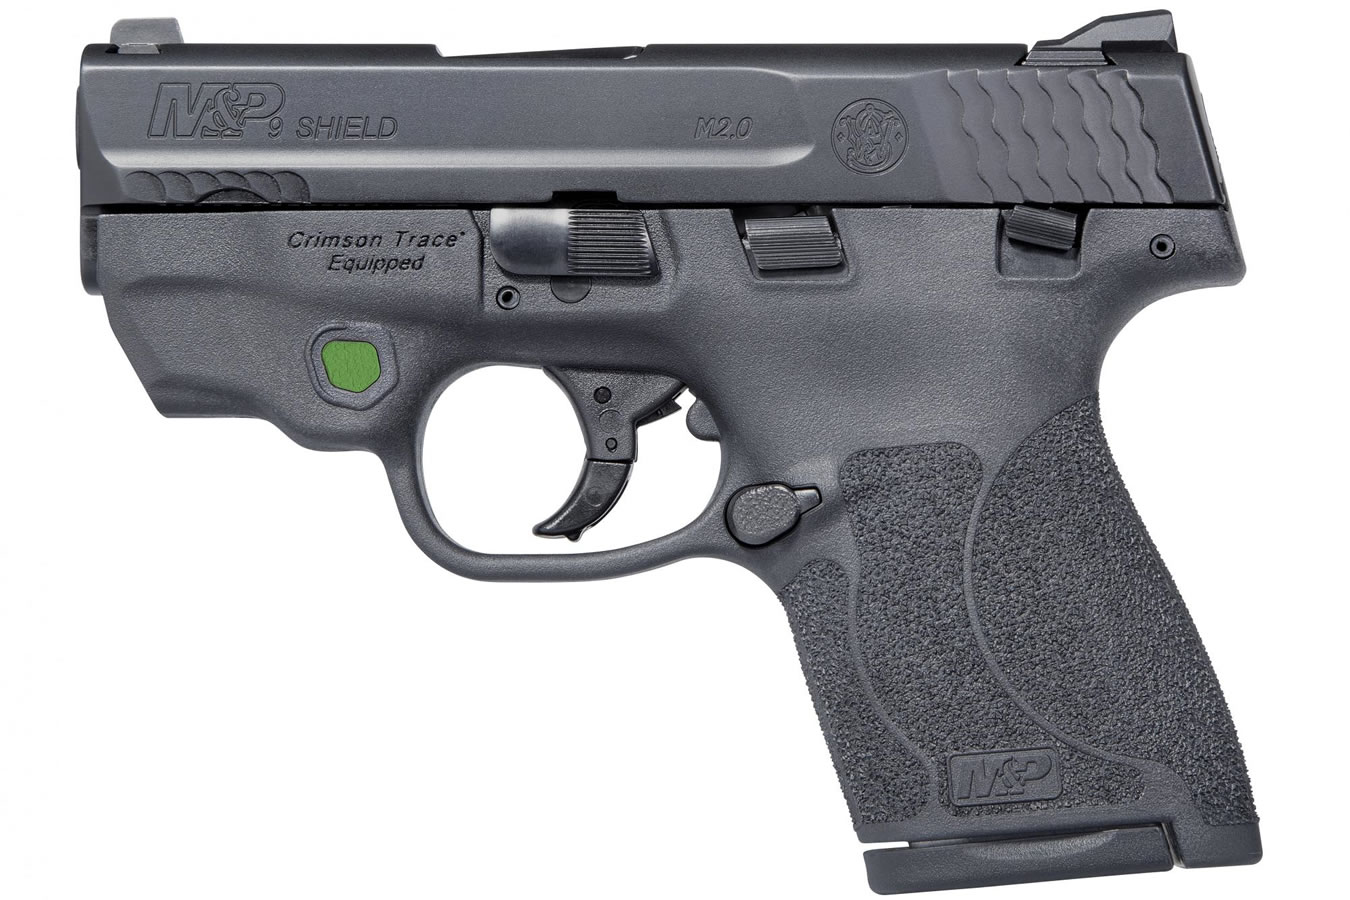 SMITH AND WESSON MP9 SHIELD M2.0 9MM W/TS CT GREEN LASER